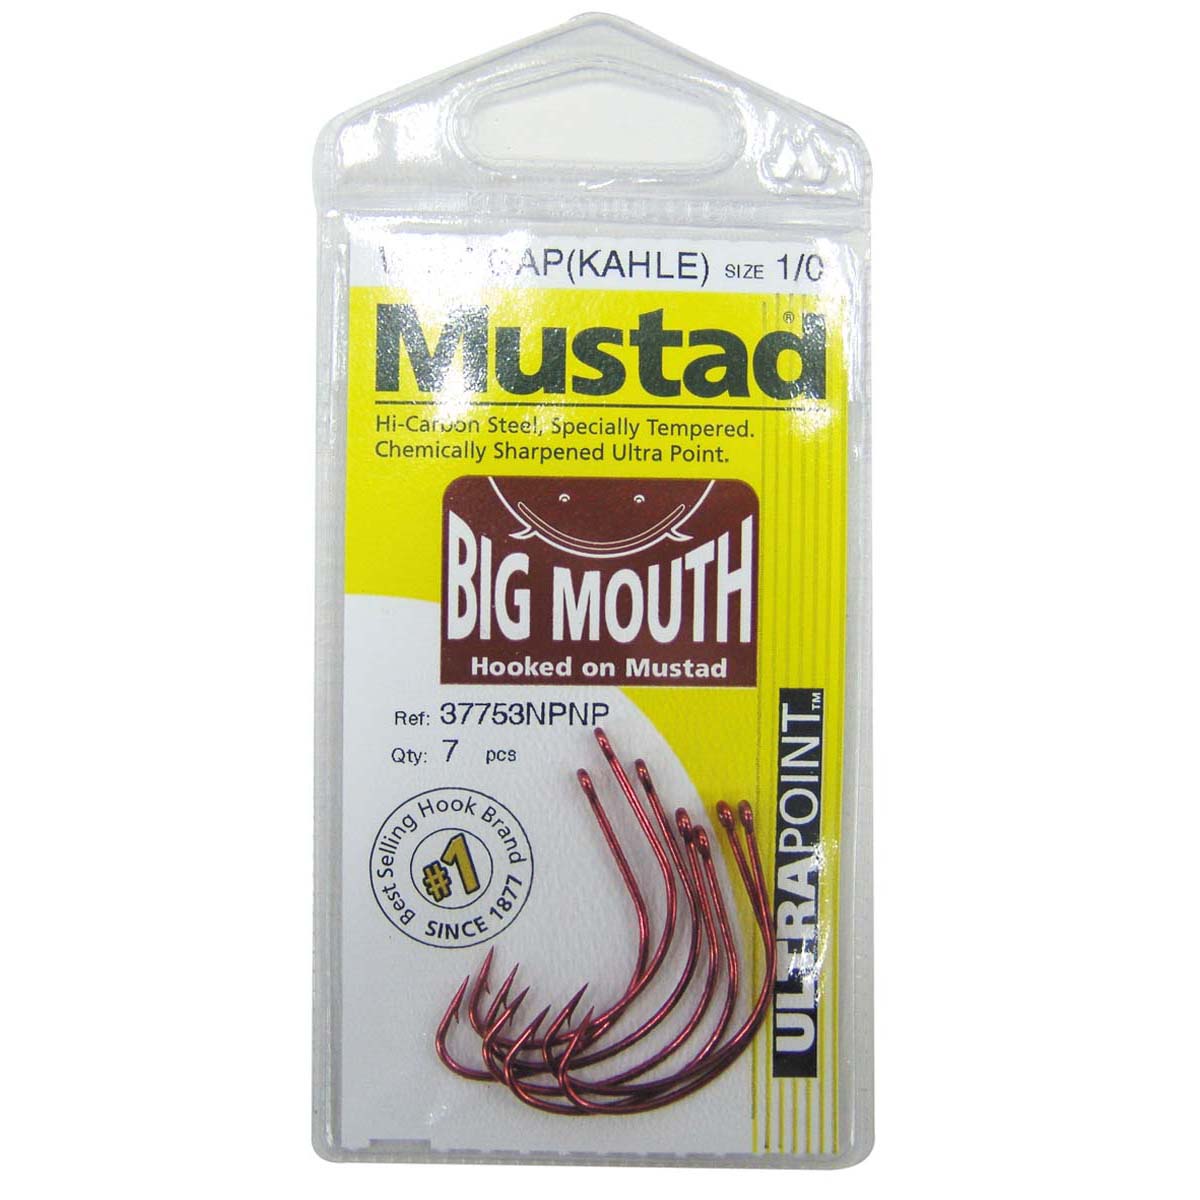 Mustad Big Mouth Hooks 4 8 Pack